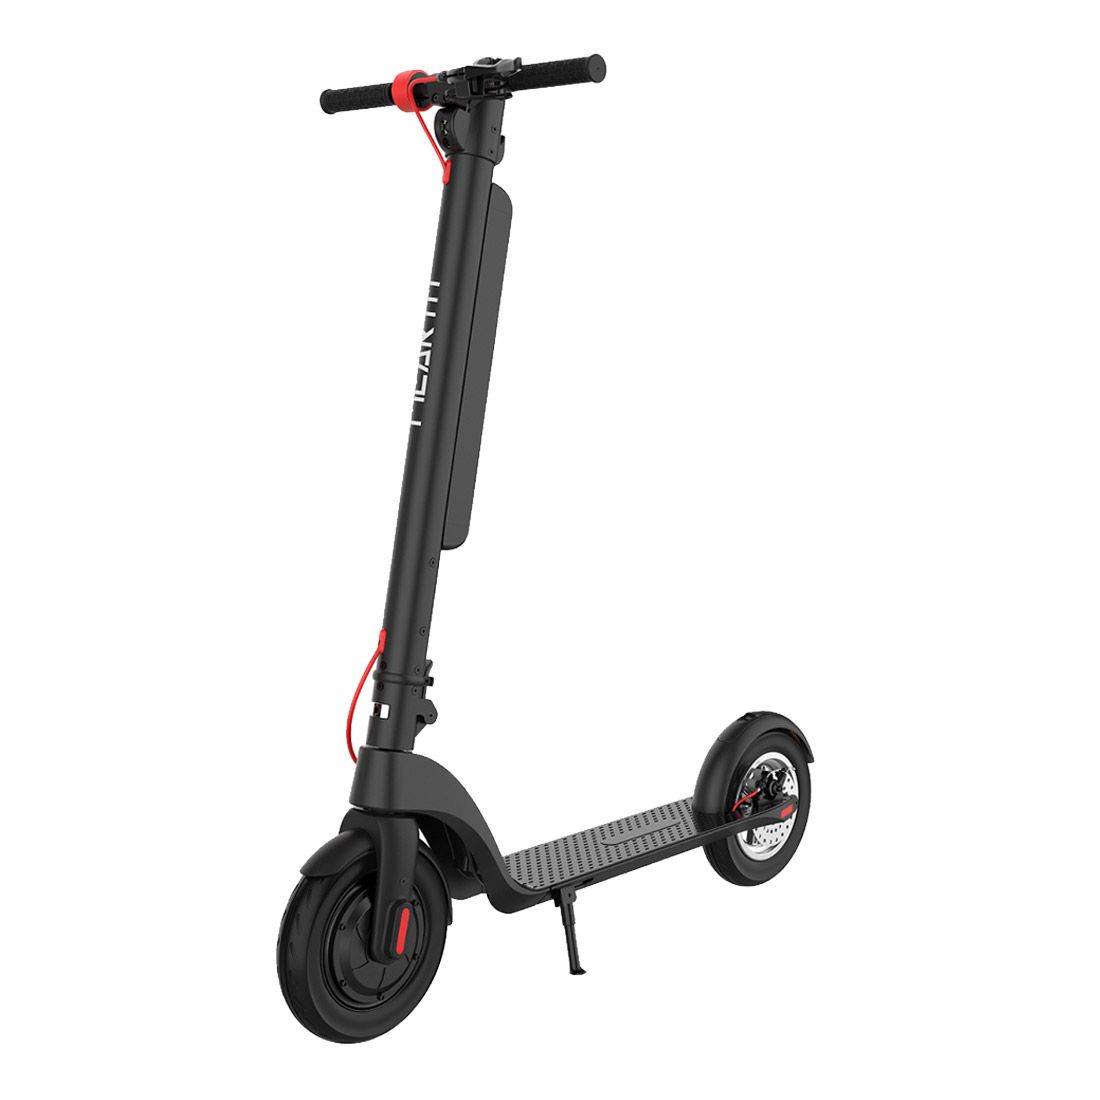 Mearth S Pro Electric Scooter (45Km, 100Kg Max Load)